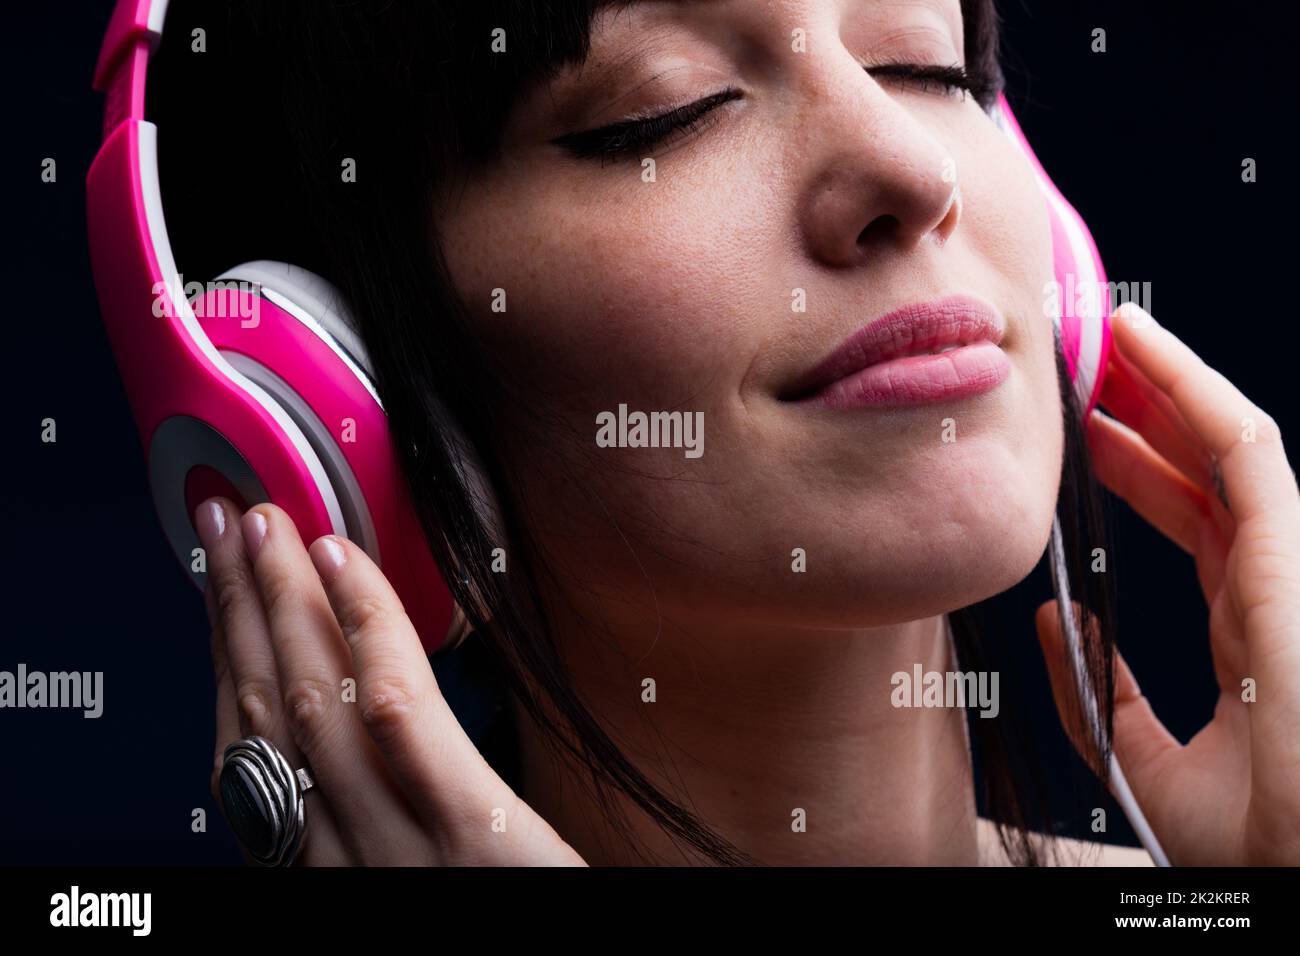 Female with closed eyes and grin using headphones Stock Photo